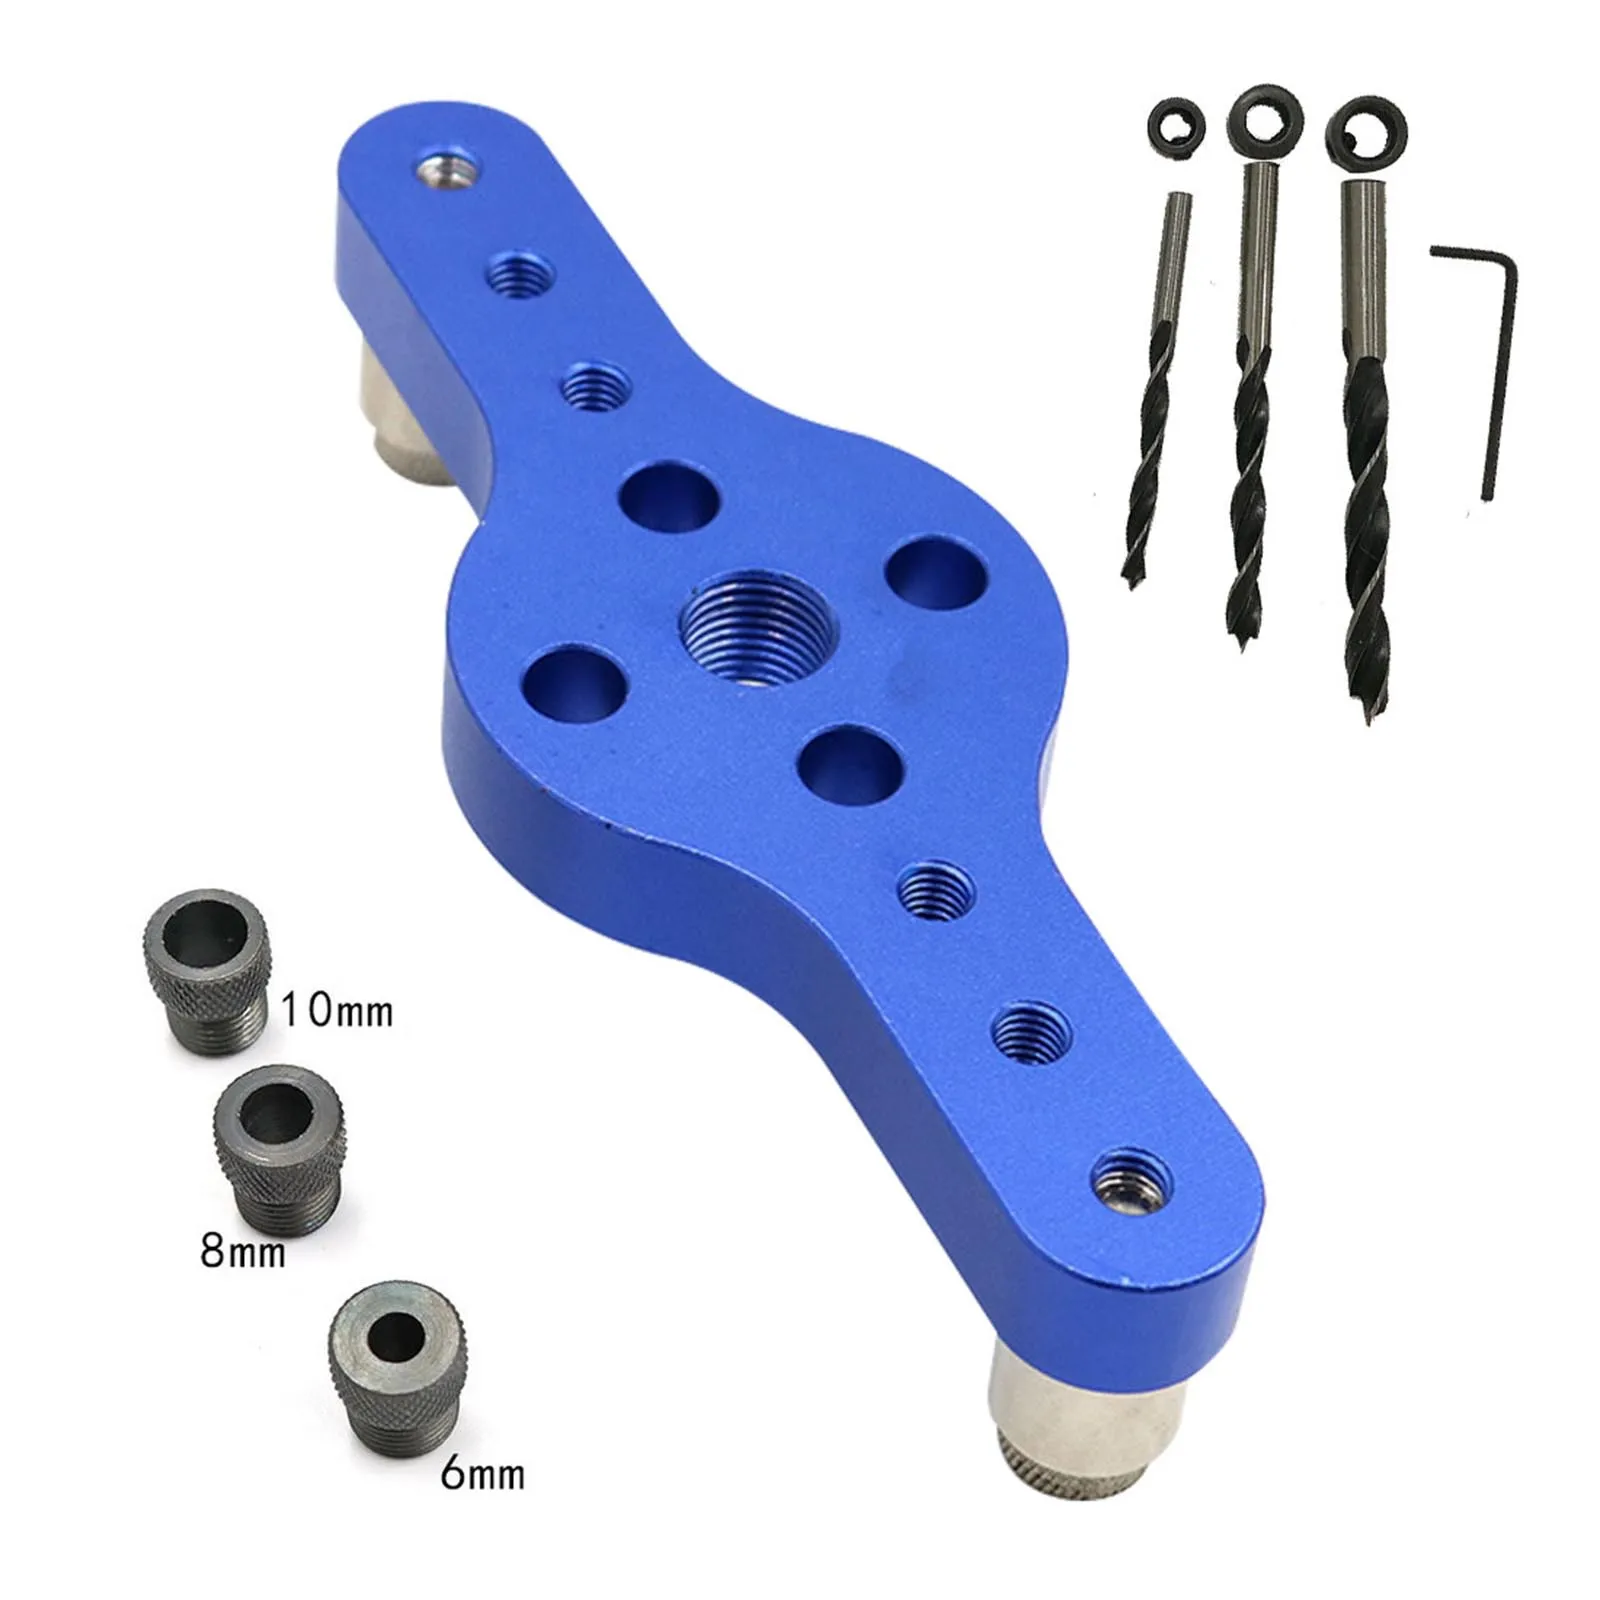 

11pcs Pocket Hole Jig Woodworking Drilling Locator 6mm 8mm 10mm Wood Vertical Doweling Self Centering Drill Guide Kit Hole Punch